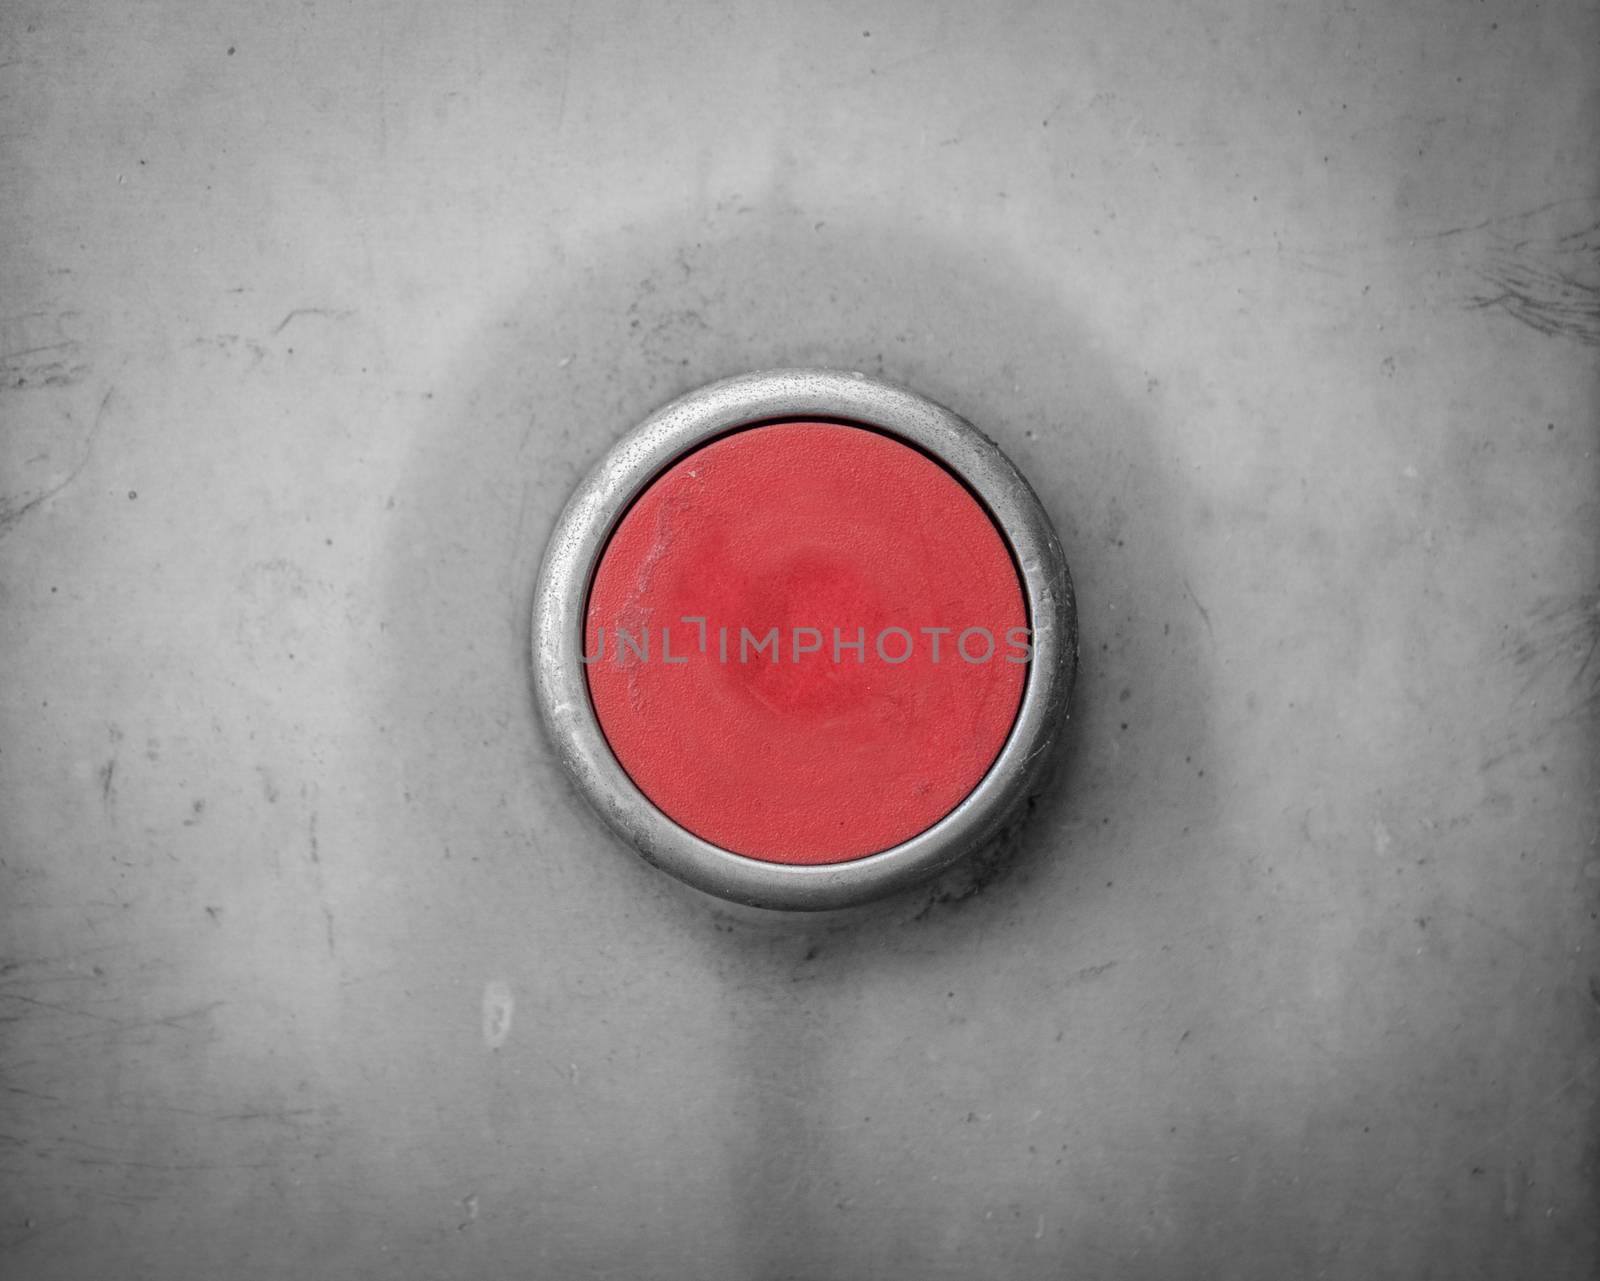 A Retro Filtered Image Of A Blank Red Industrial Button